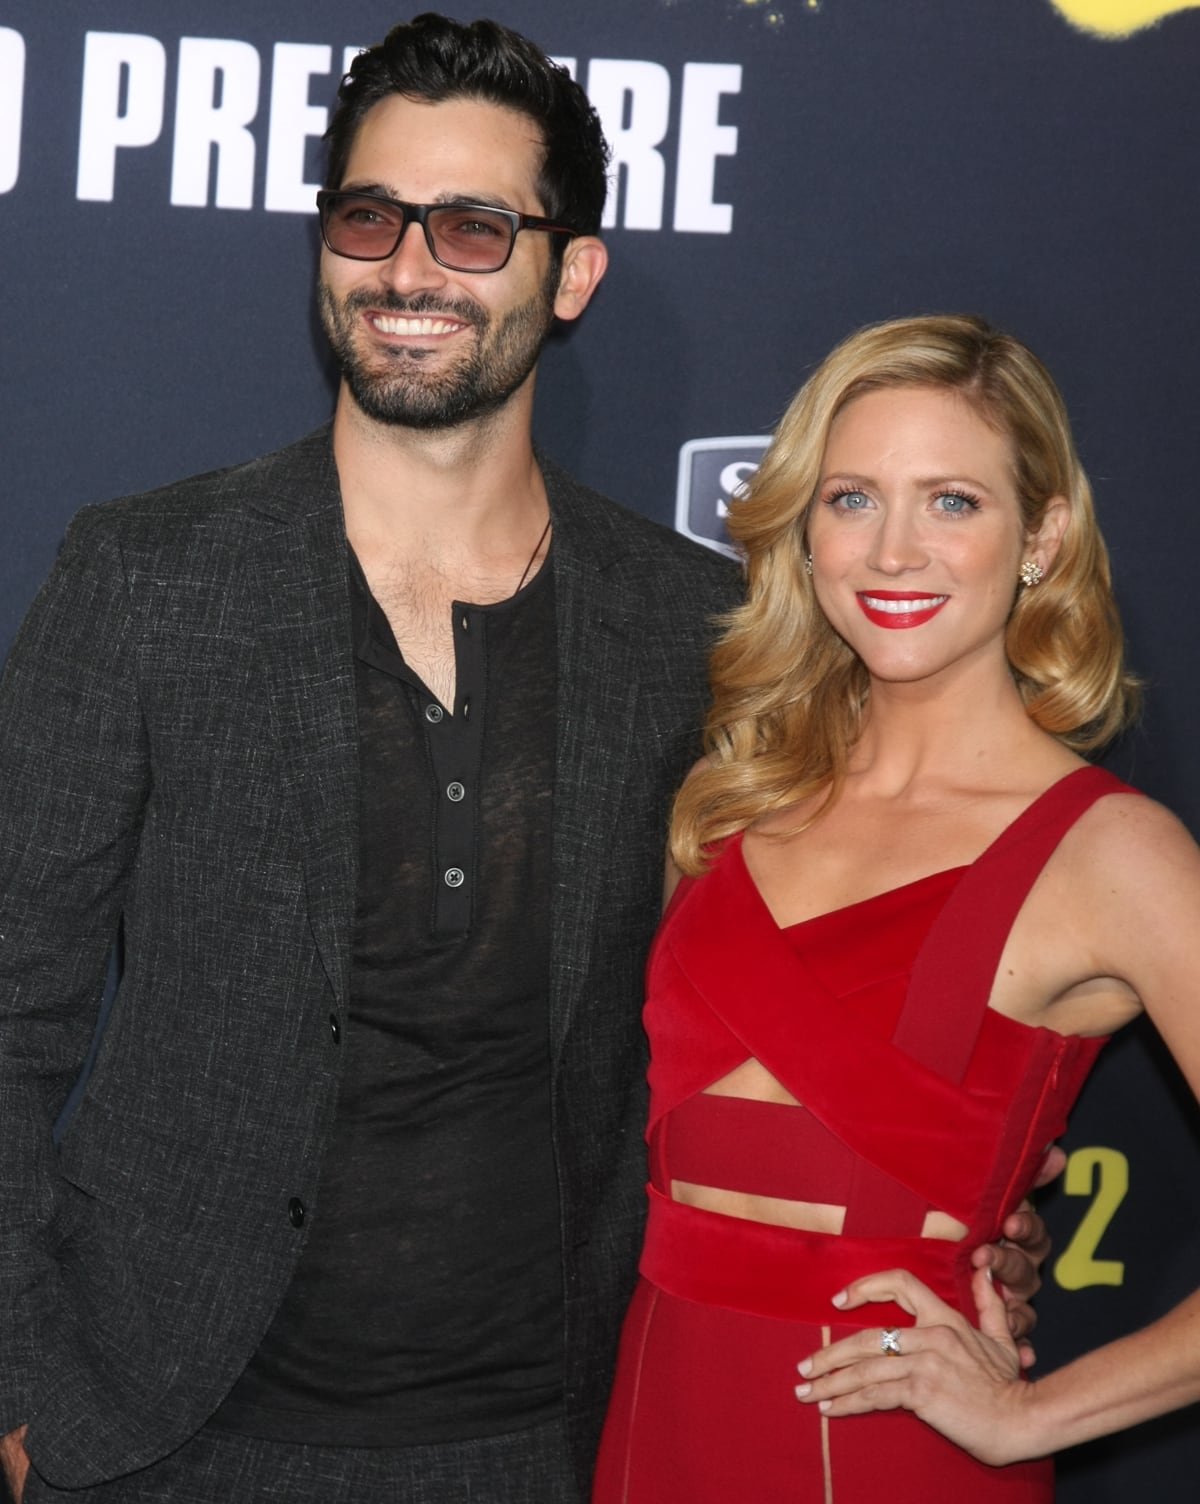 Brittany Snow and Tyler Hoechlin split in 2015 after dating for more than two years